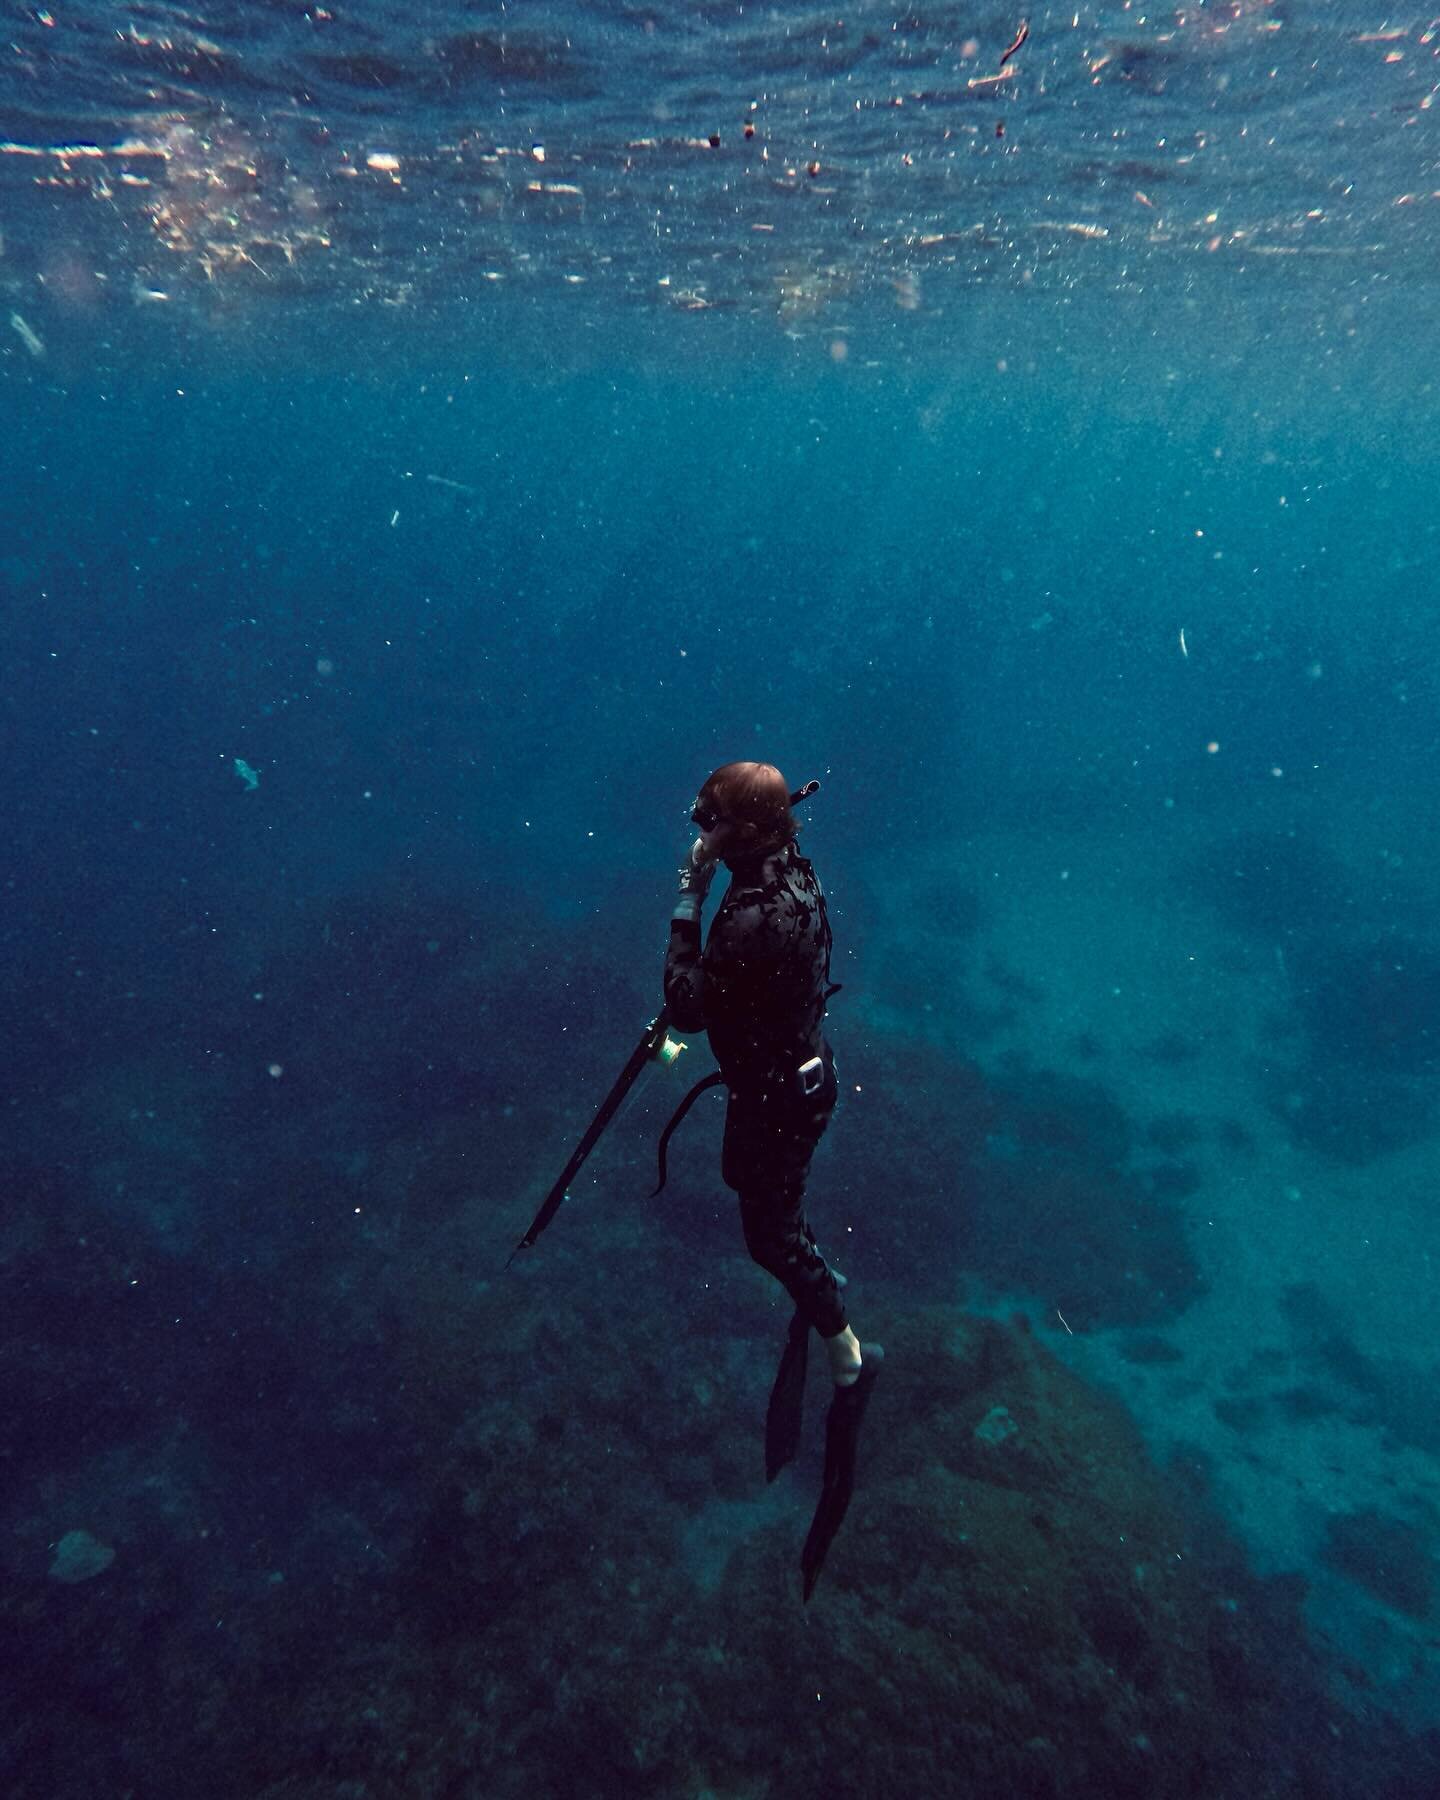 Imagine this: You&rsquo;re gearing up for a fun and sunny spearfishing trip with Fusion Freedive and Spearfishing. As you board the boat, excitement bubbles up, knowing that today&rsquo;s adventure will be one for the books. With the sun beaming down